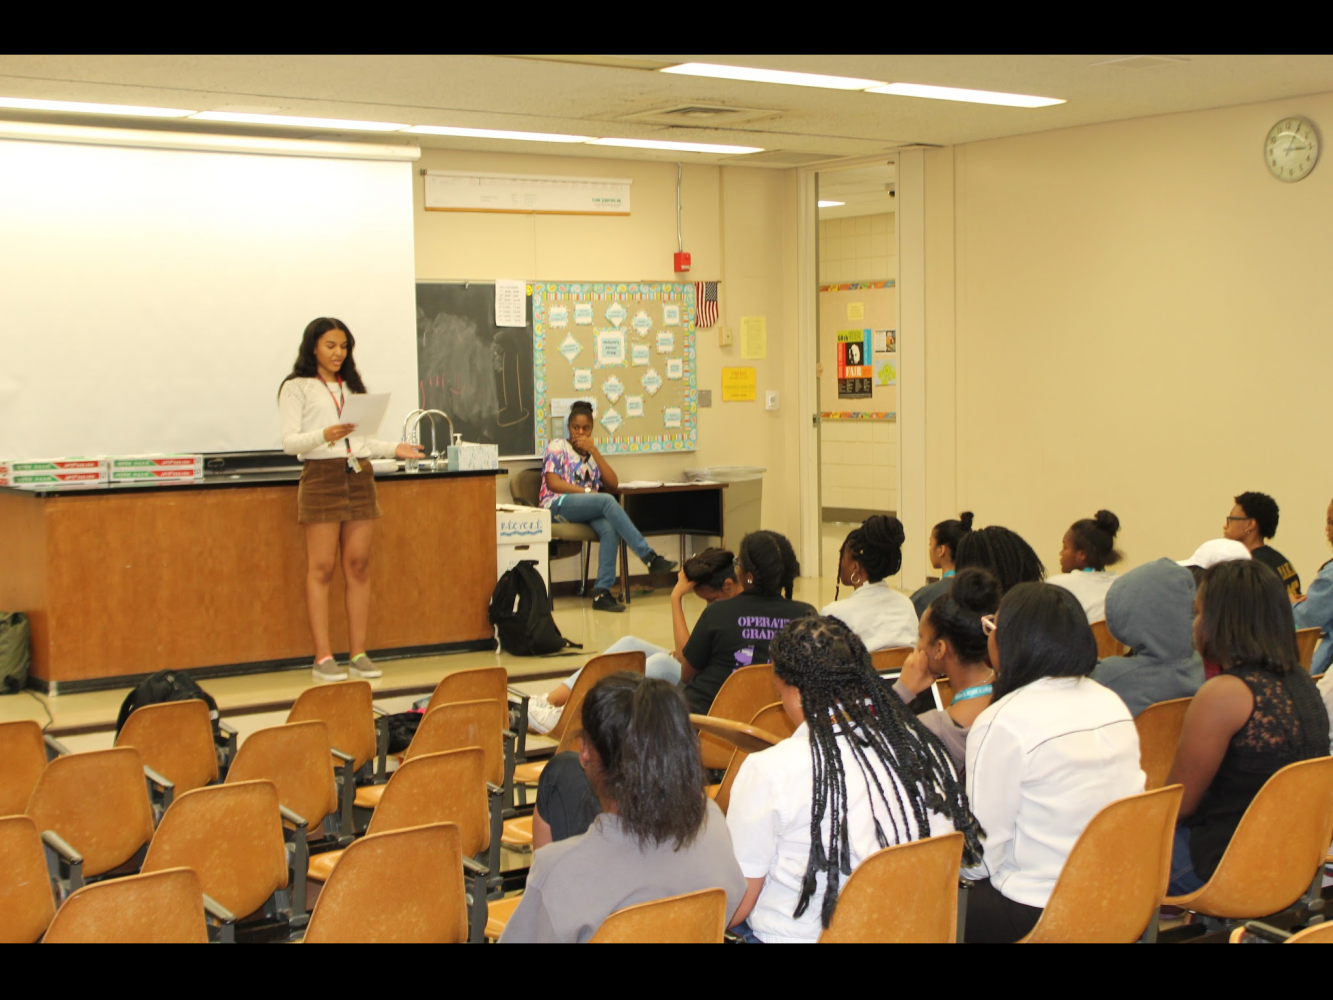 The Black Awareness Society for Education celebrates its final meeting and holds the elections for next years officers. (Photo Credit: Jasmine Williams)